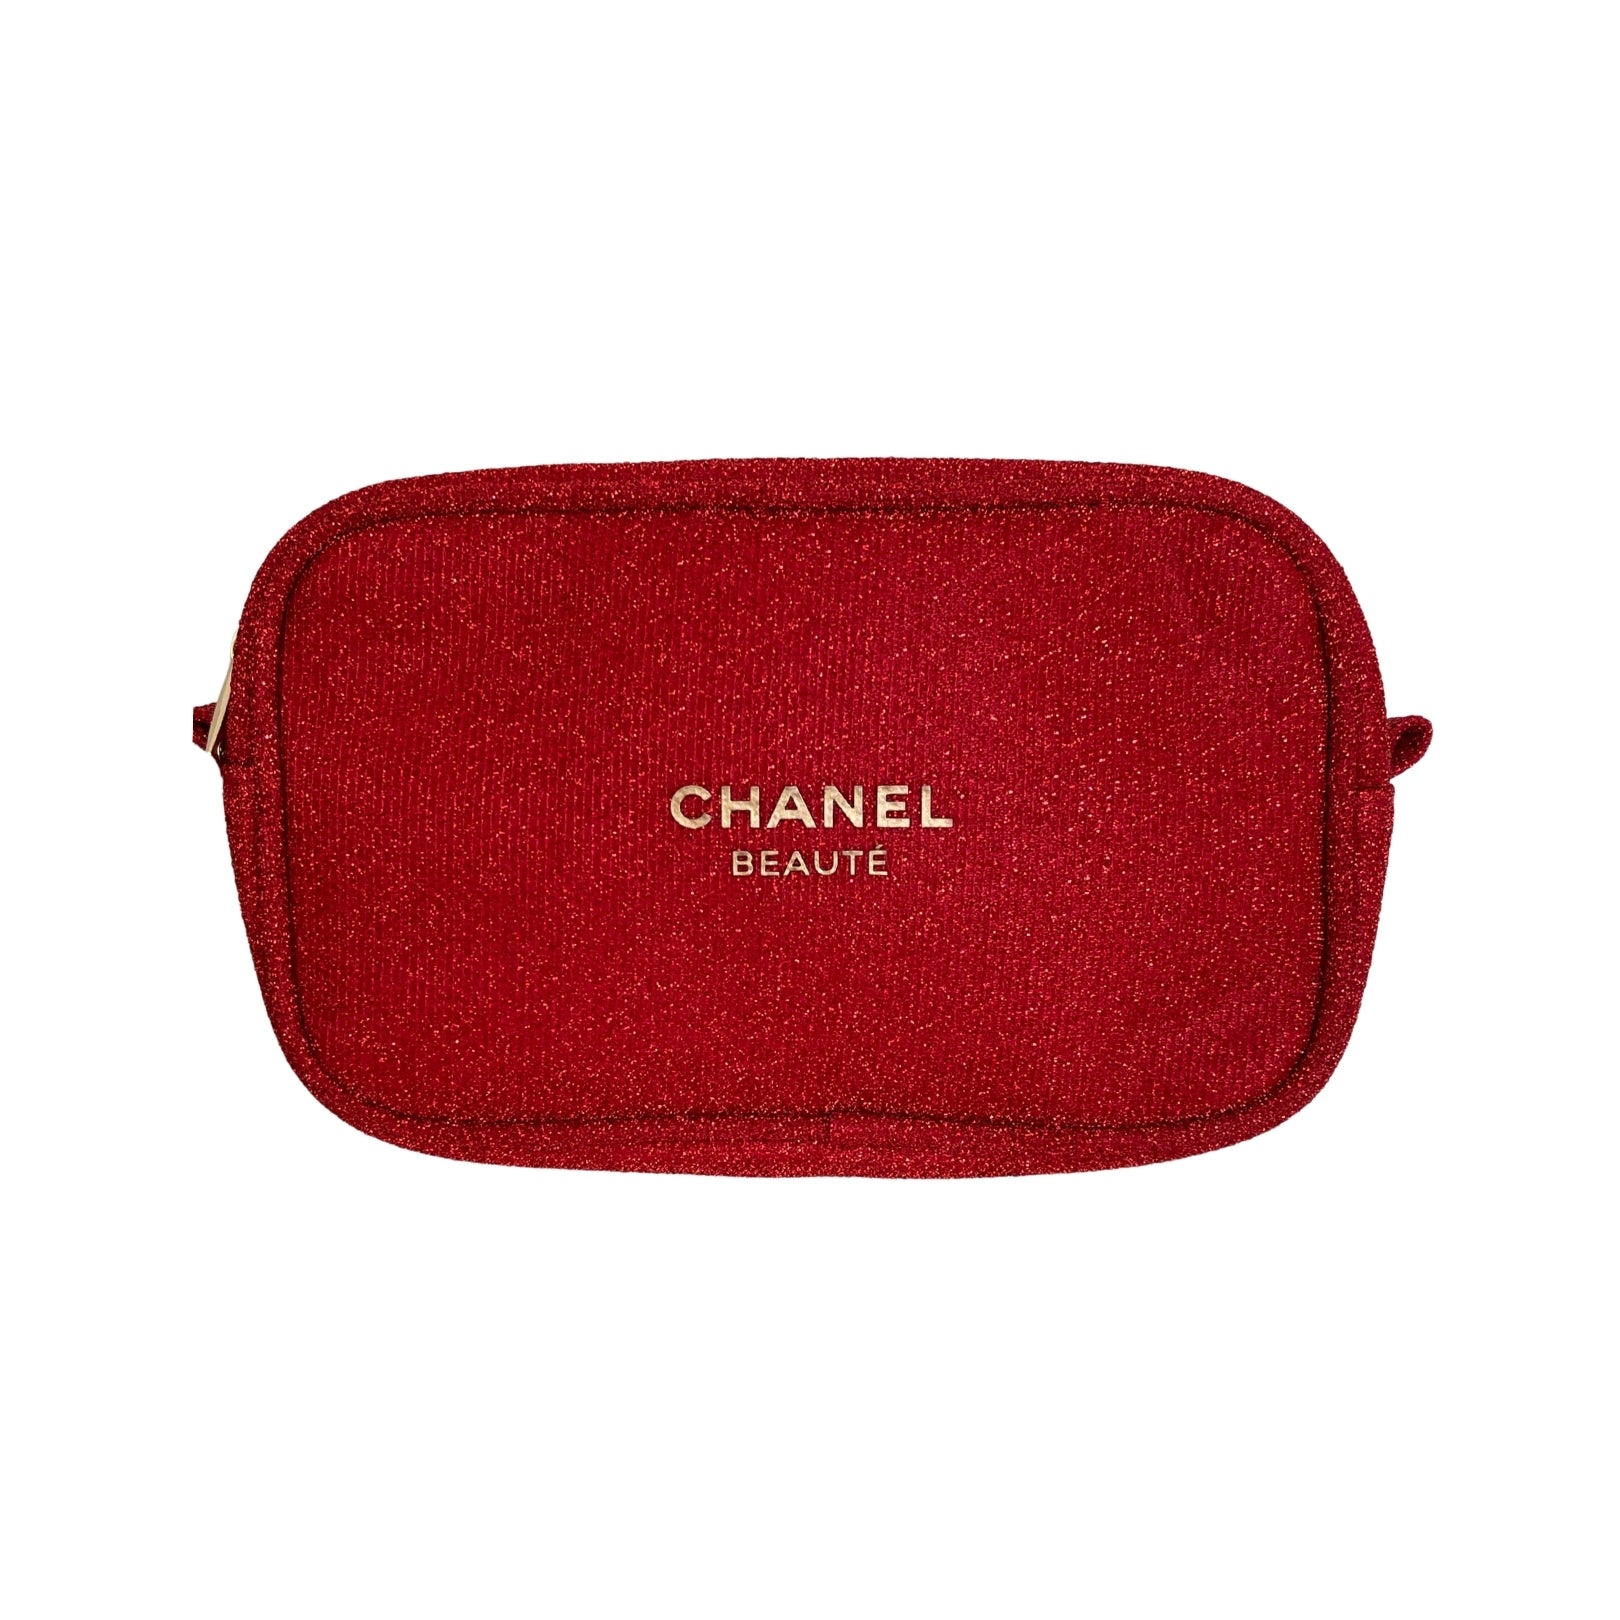 CHANEL Beaute Makeup Vintage New Cosmetic Bag 6 x 4.5 x 2 Deep Red Velvet  & Box